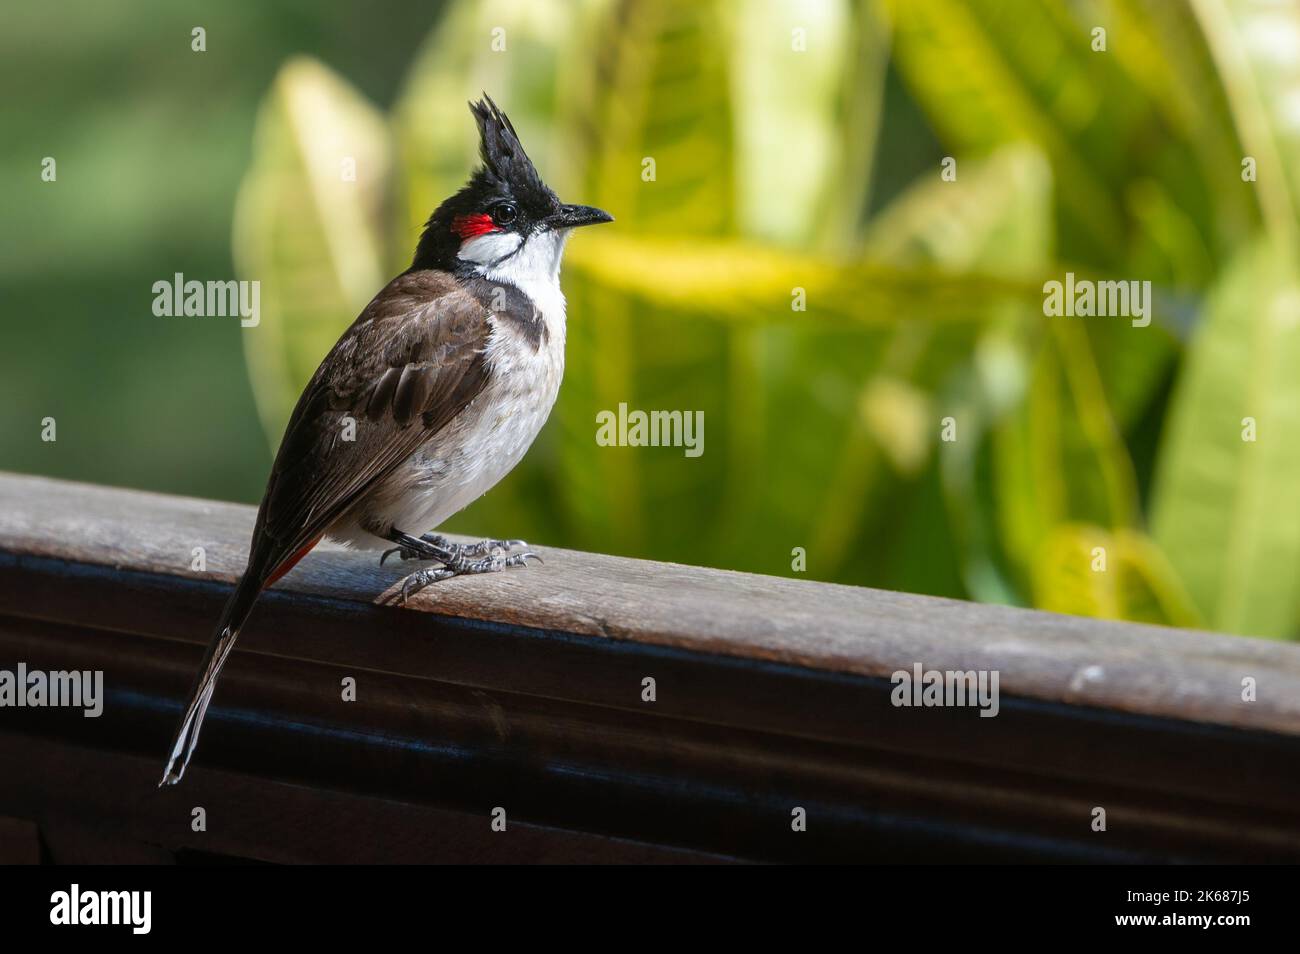 Red-whiskered bulbul, pycnonotus jocosus, perched on wood fence Stock Photo